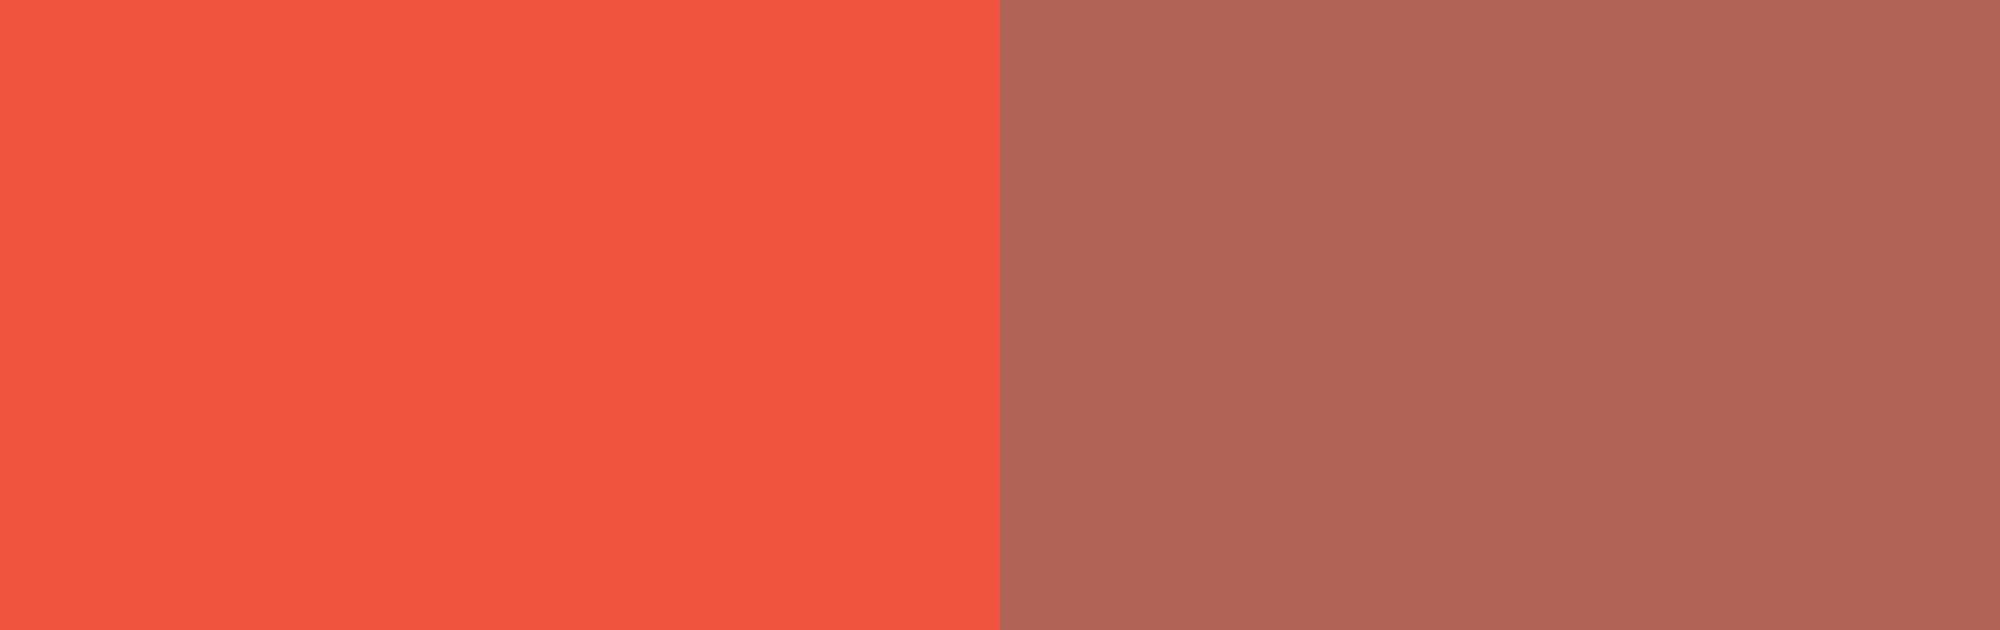 Two contrasting colors of different tone.